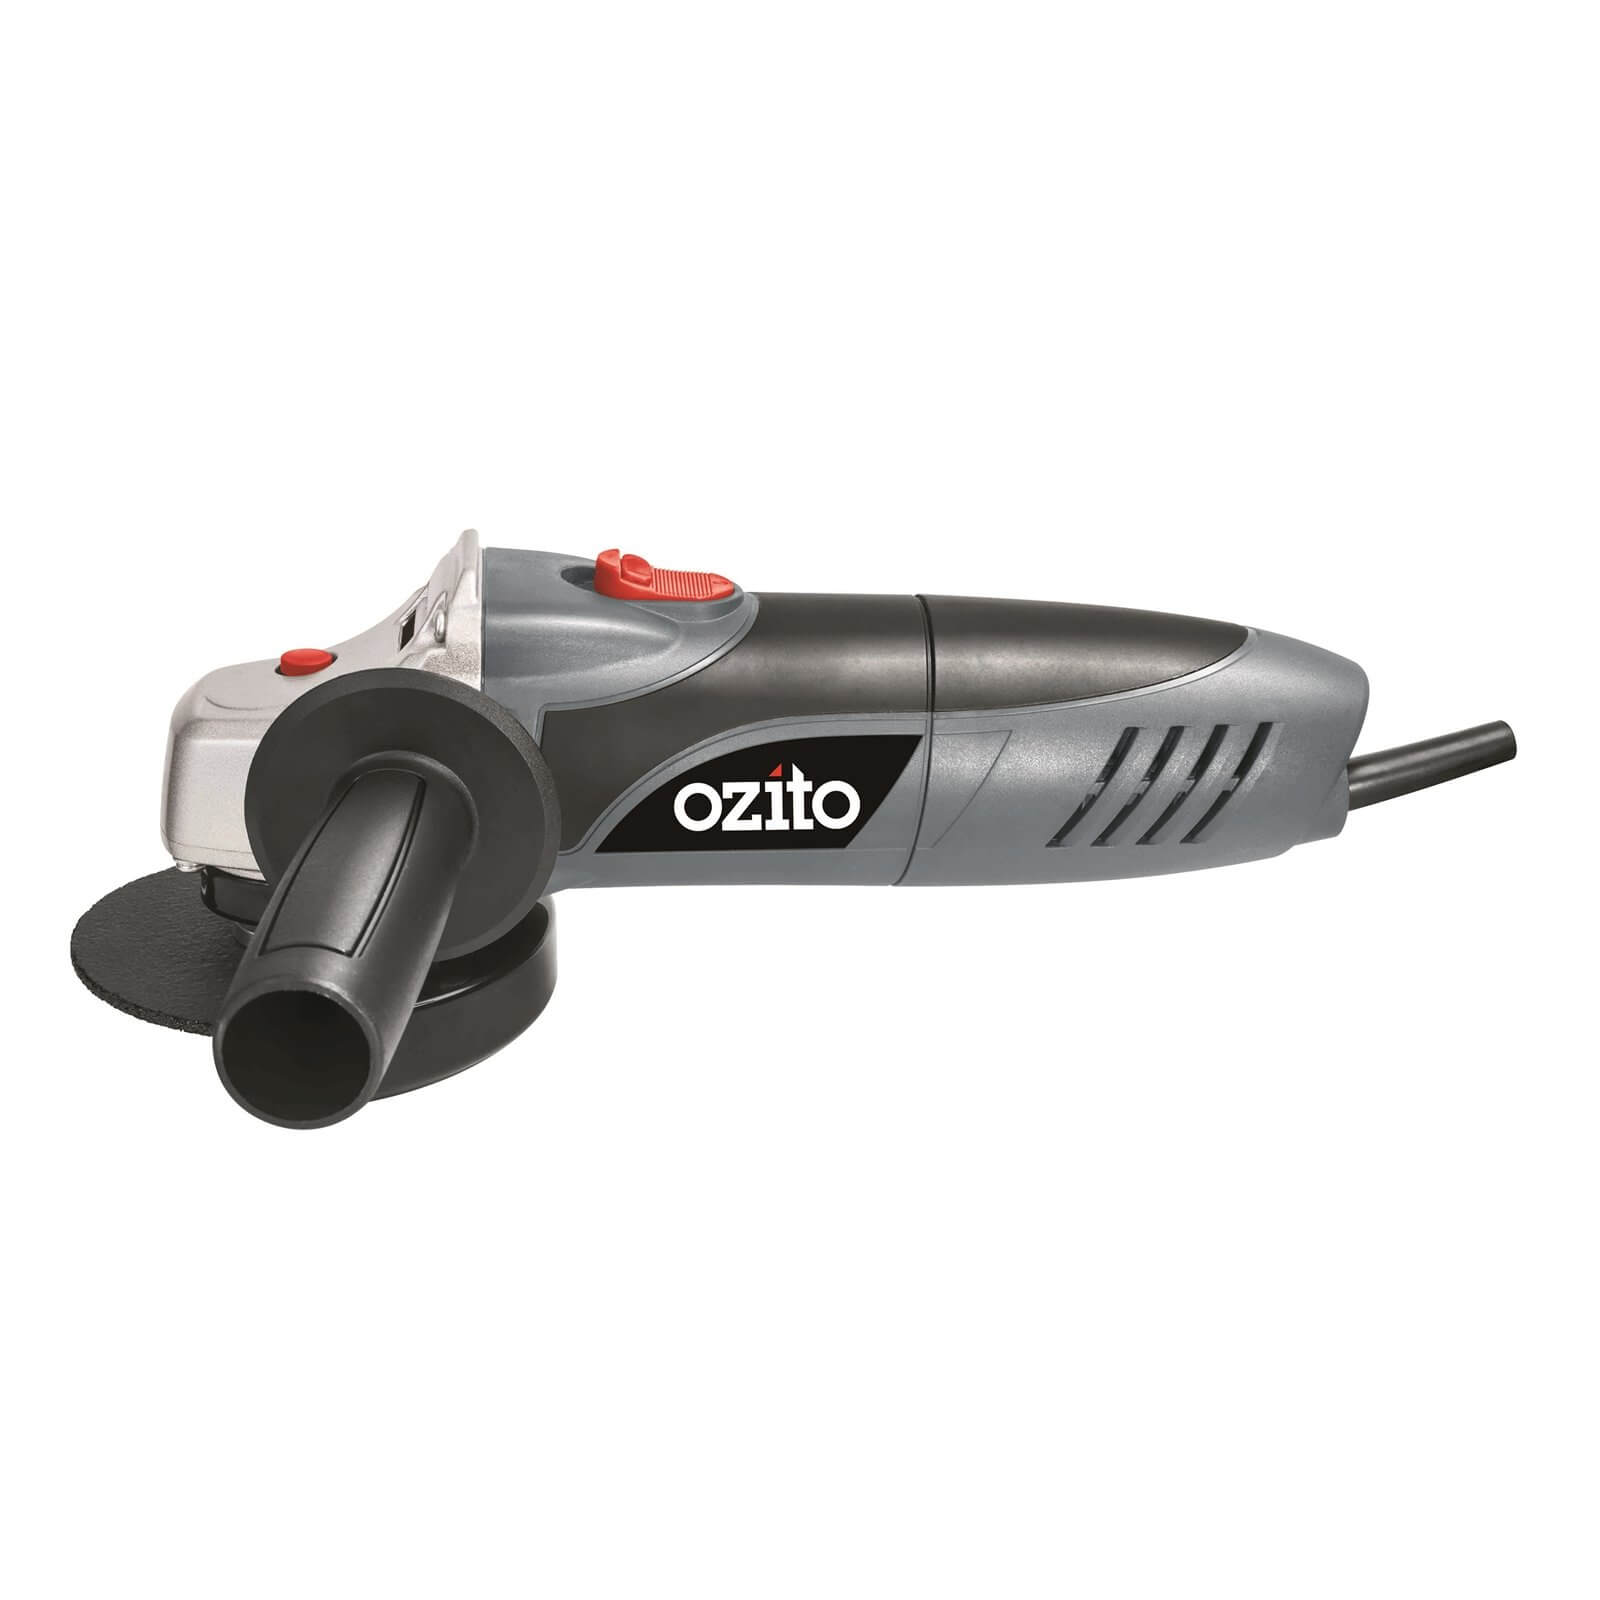 Ozito by Einhell 850W 115mm Angle Grinder